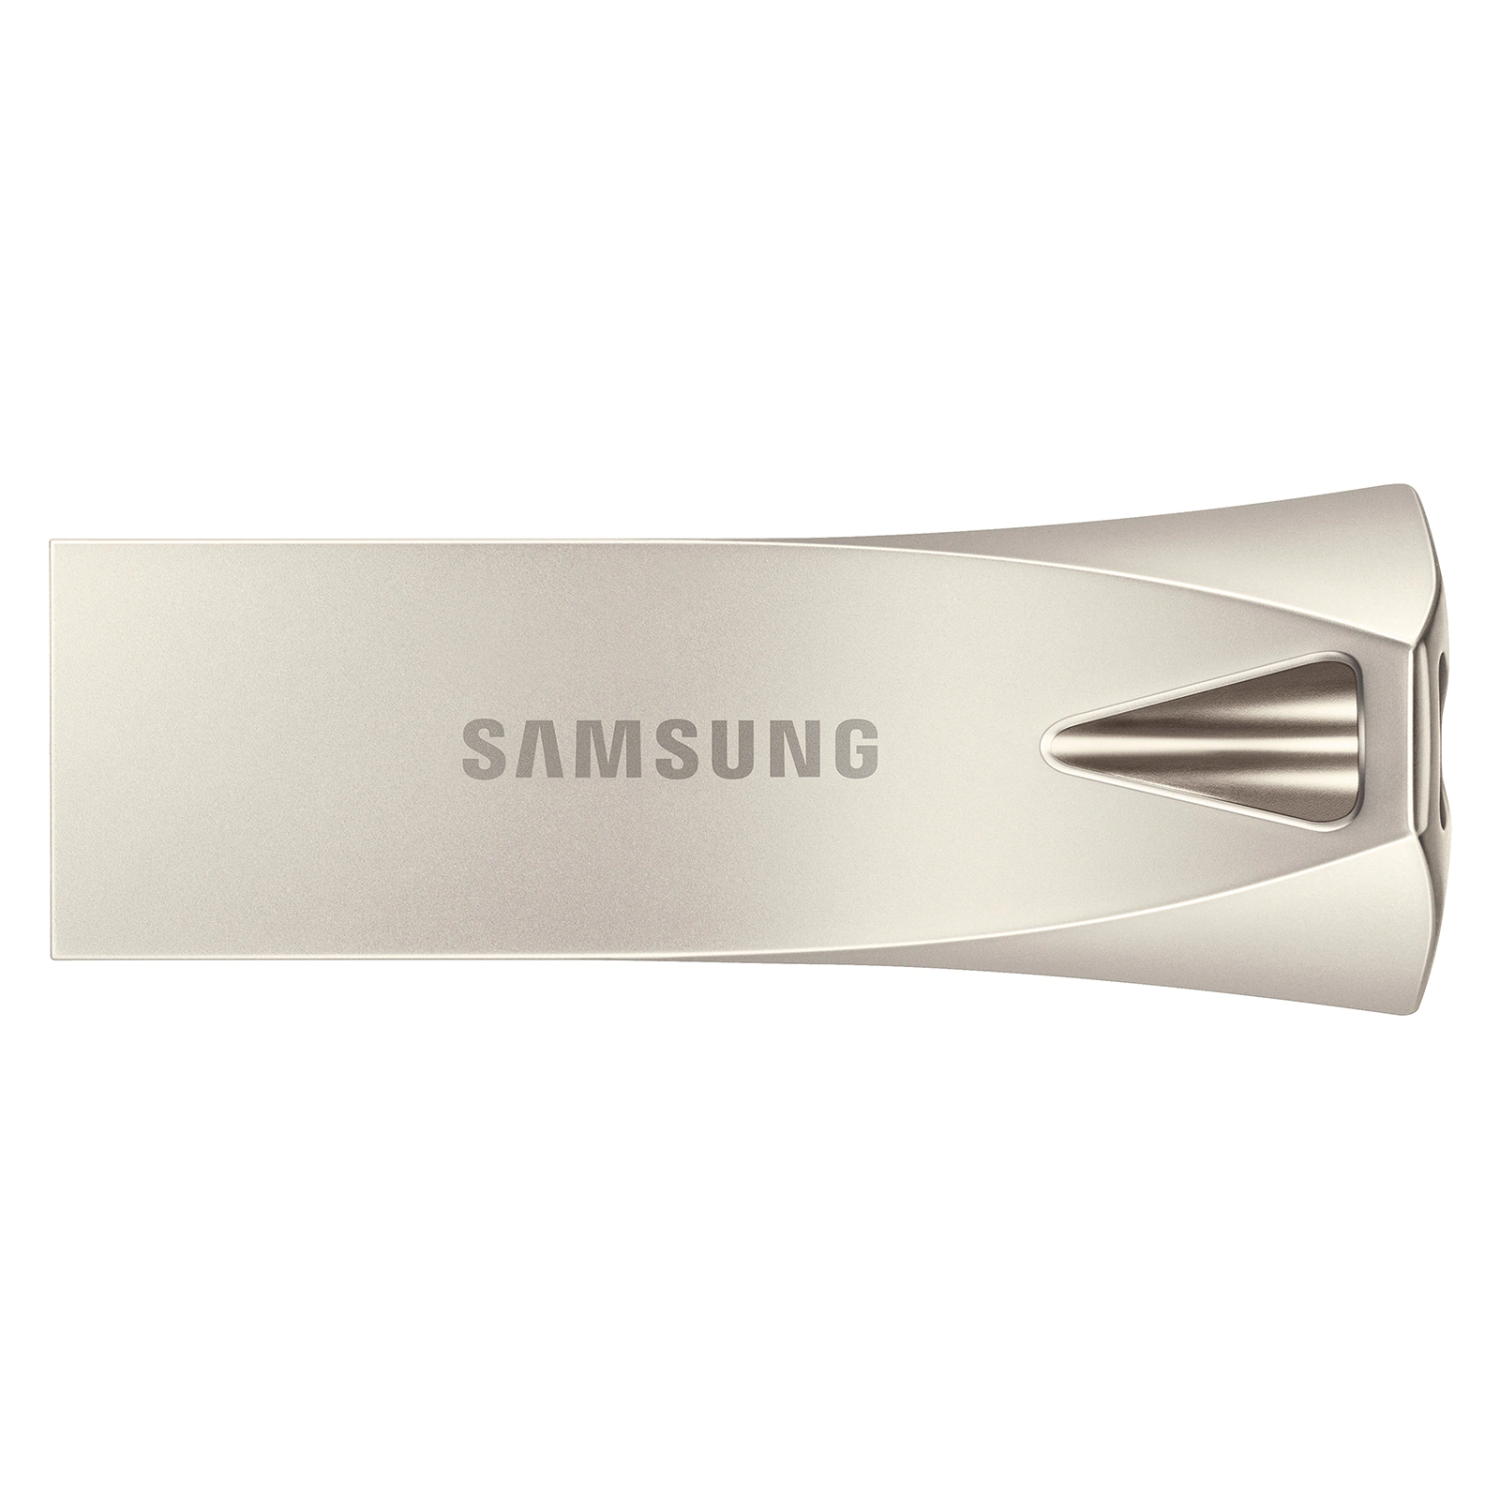 Samsung 256GB USB 3.1 Flash Drive BAR Plus Champagne Silver up to 400MB/s (MUF-256BE3)